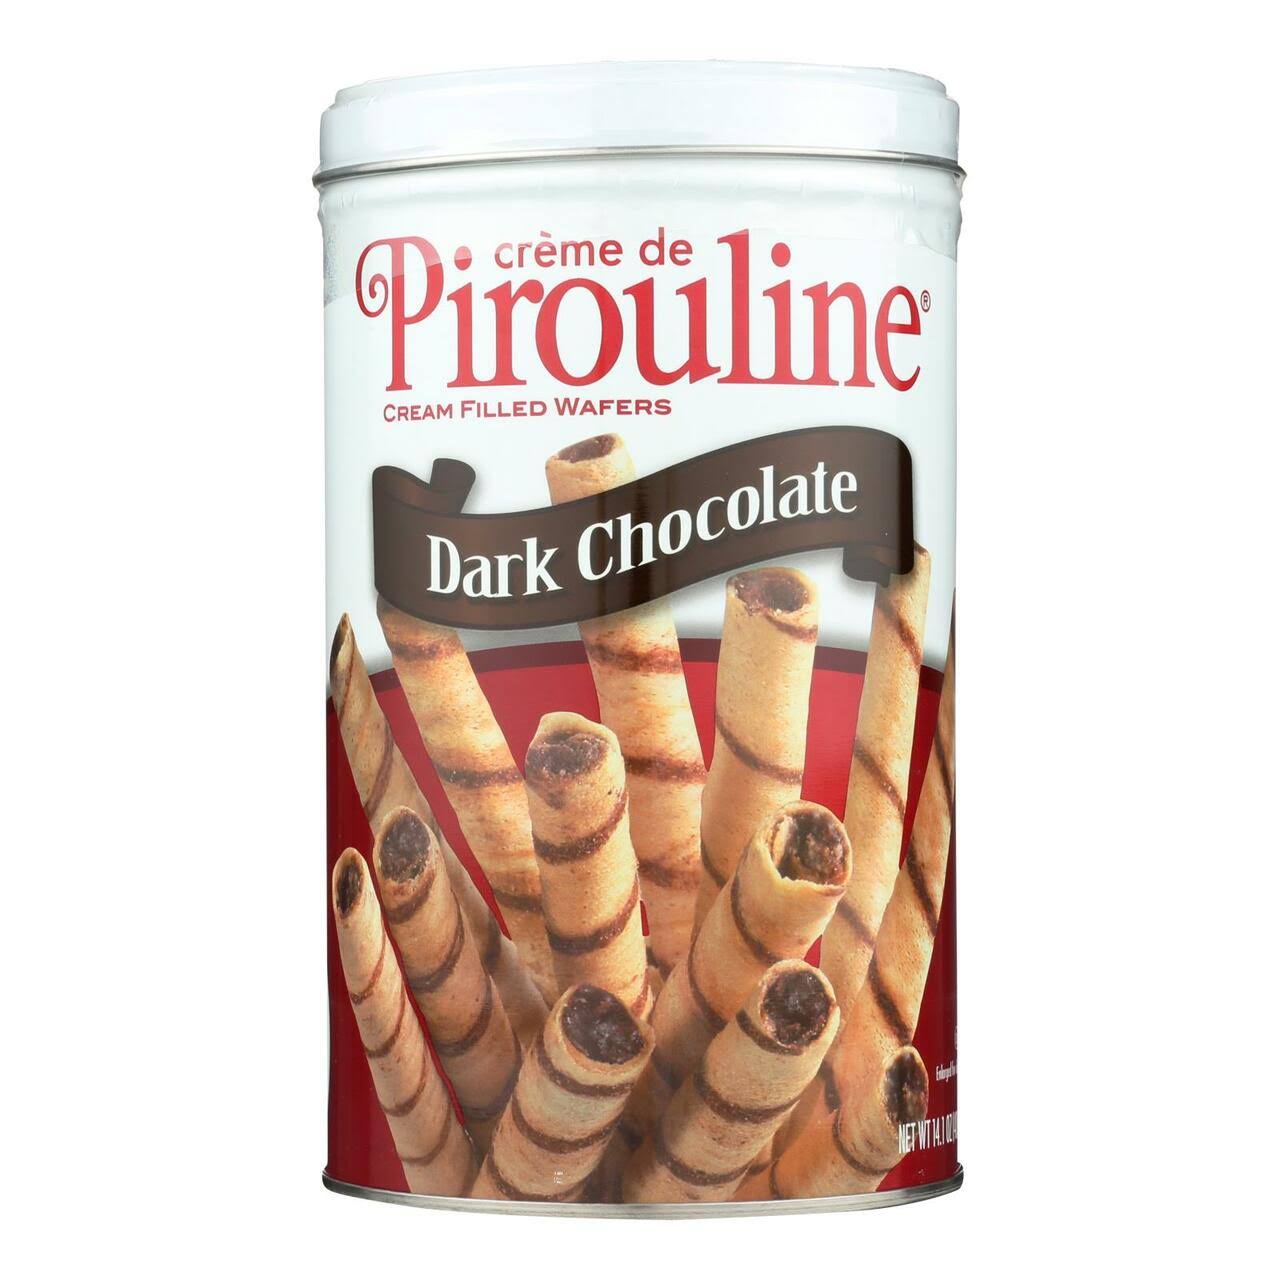 Pirouline Dark Chocolate Filled Rolled Wafers Crème - 14oz